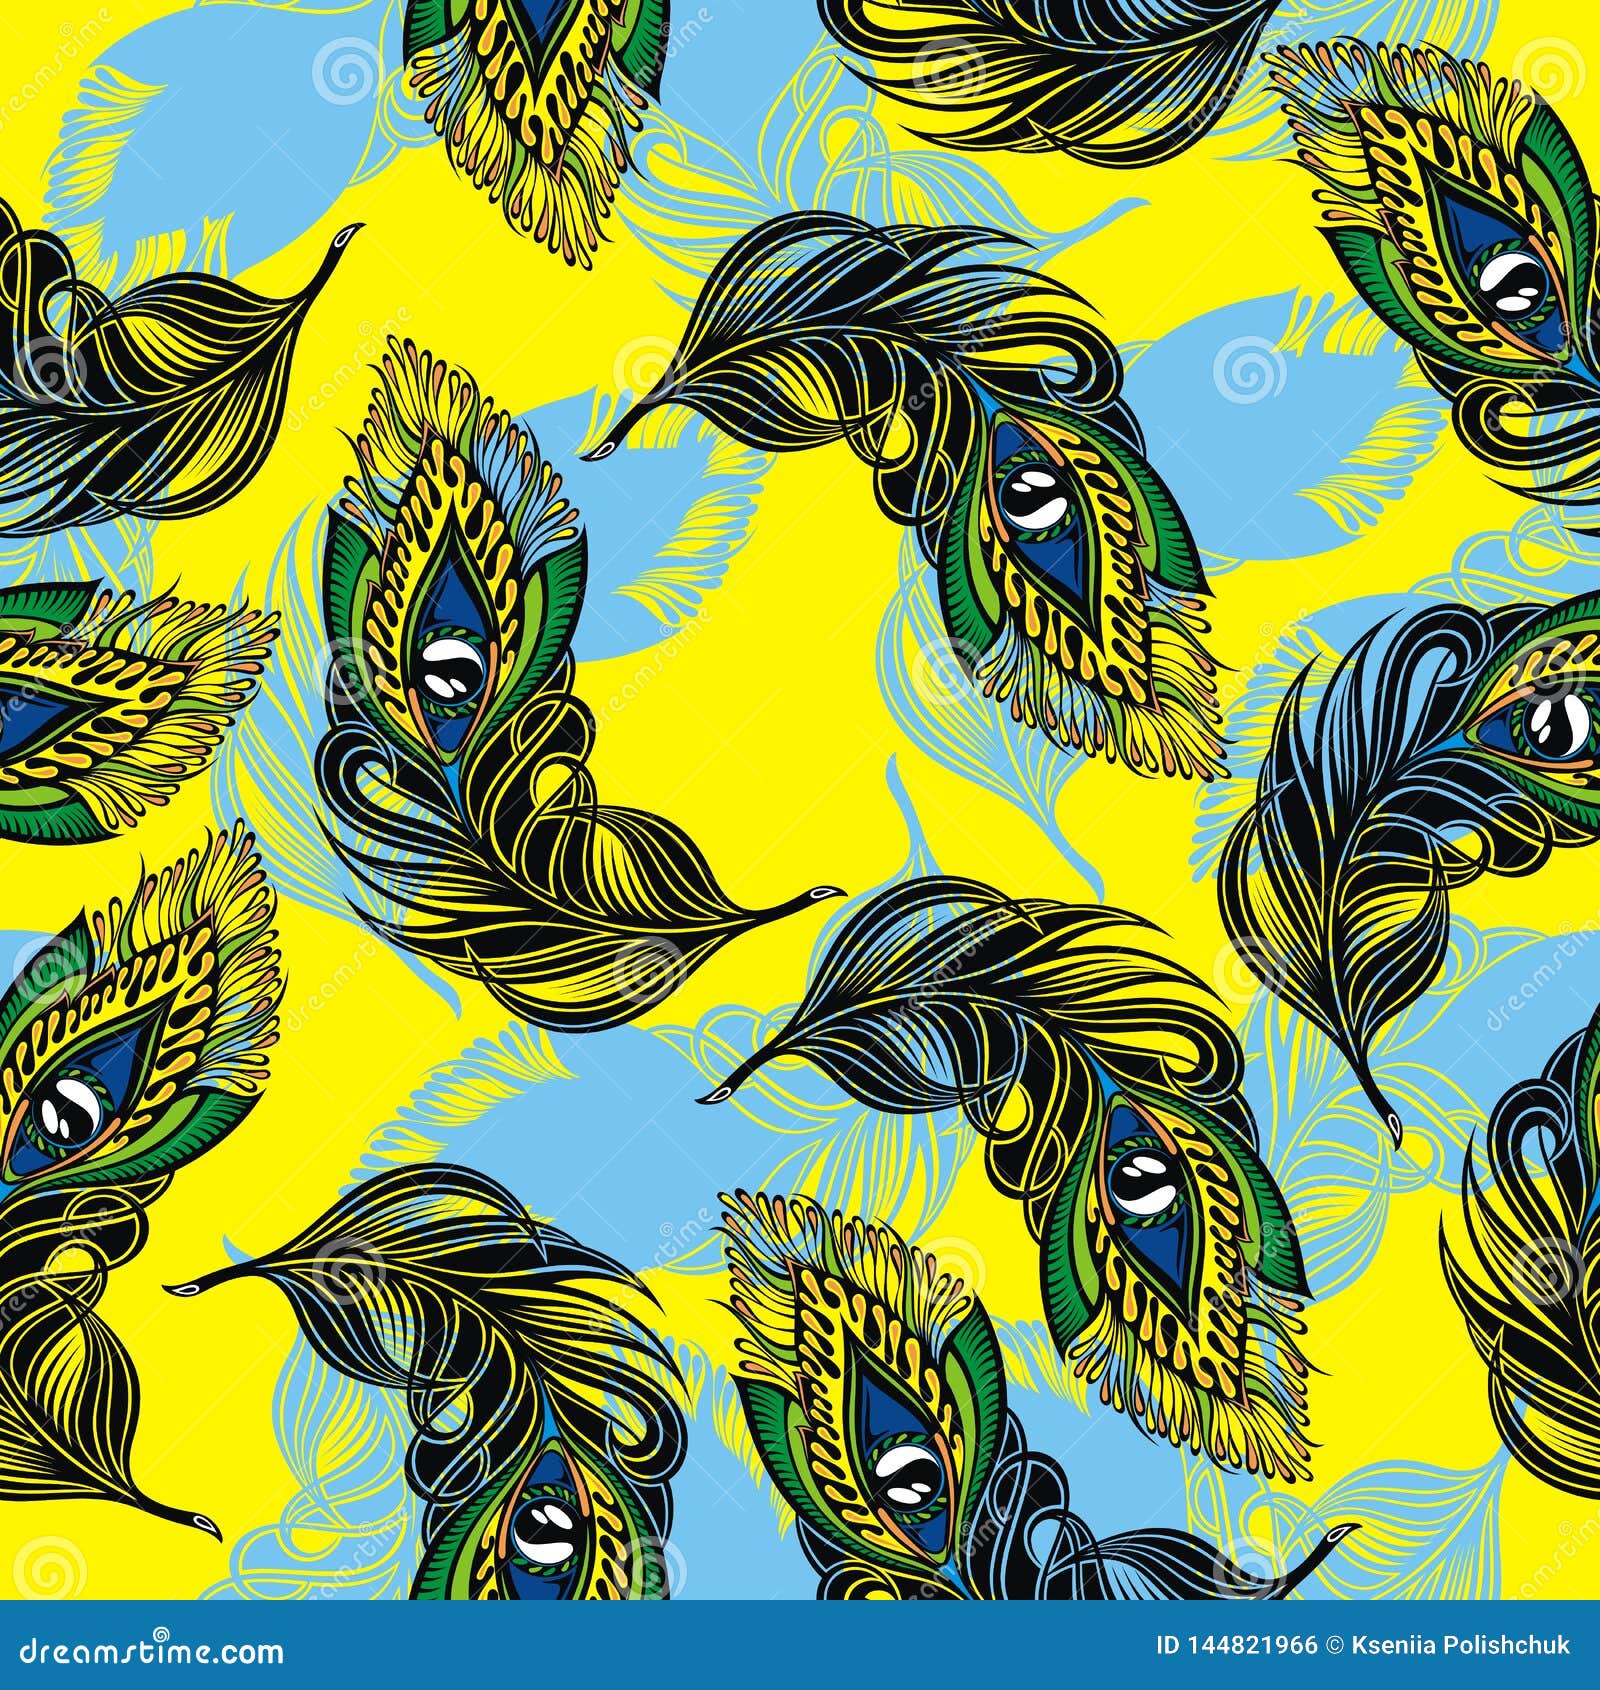 Download Vector Seamless Pattern With Stylized Peacock Feather ...